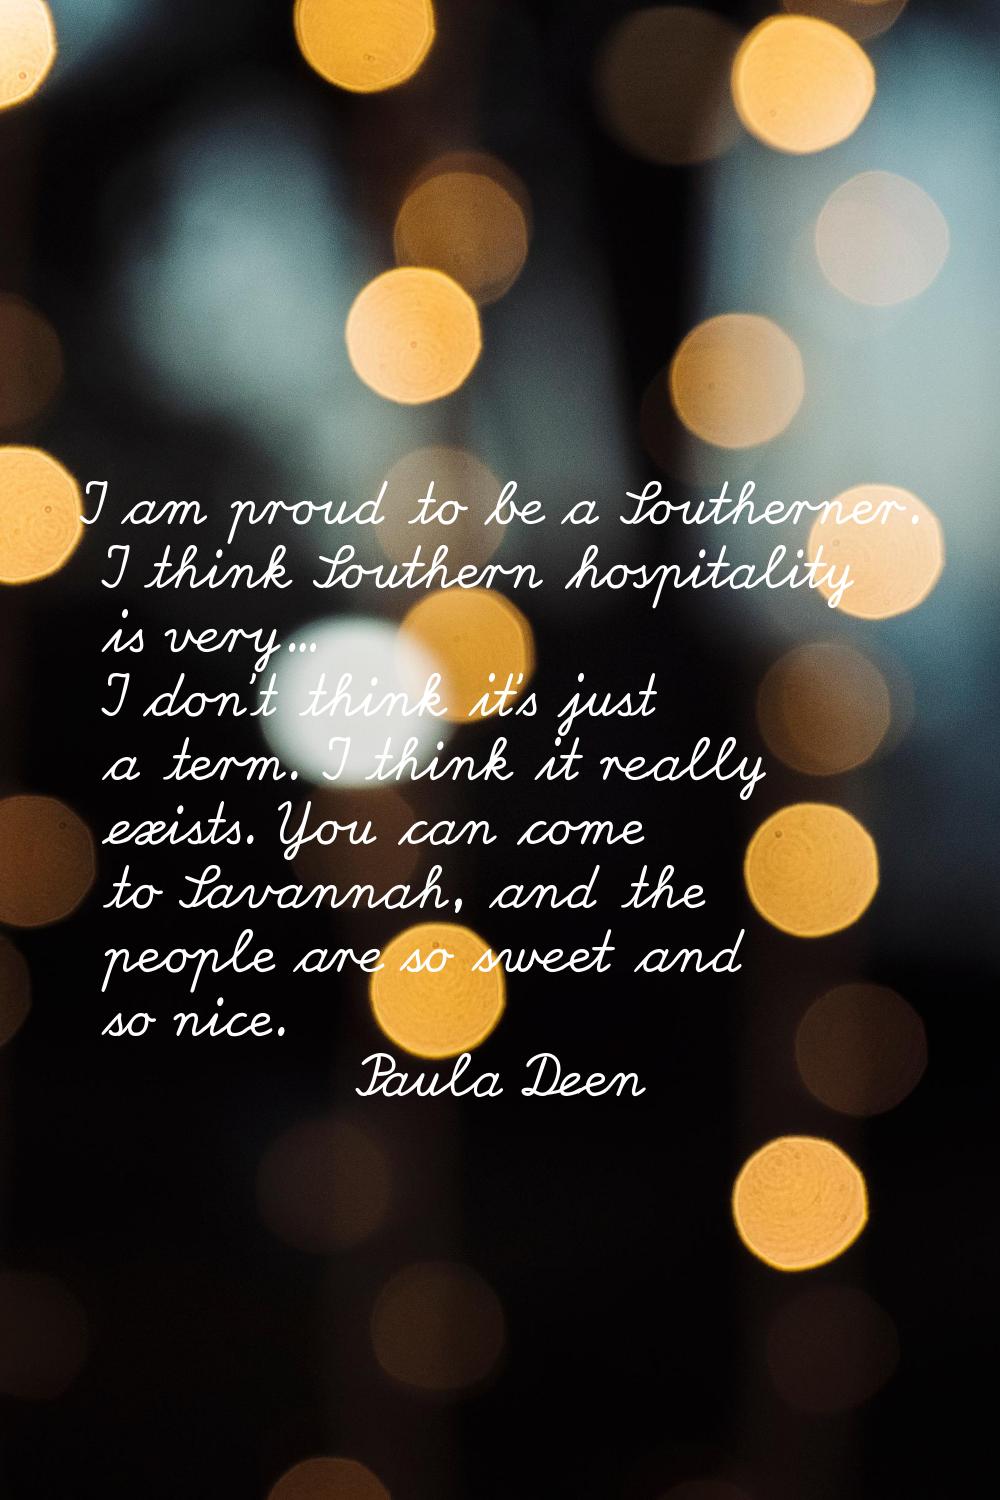 I am proud to be a Southerner. I think Southern hospitality is very... I don't think it's just a te